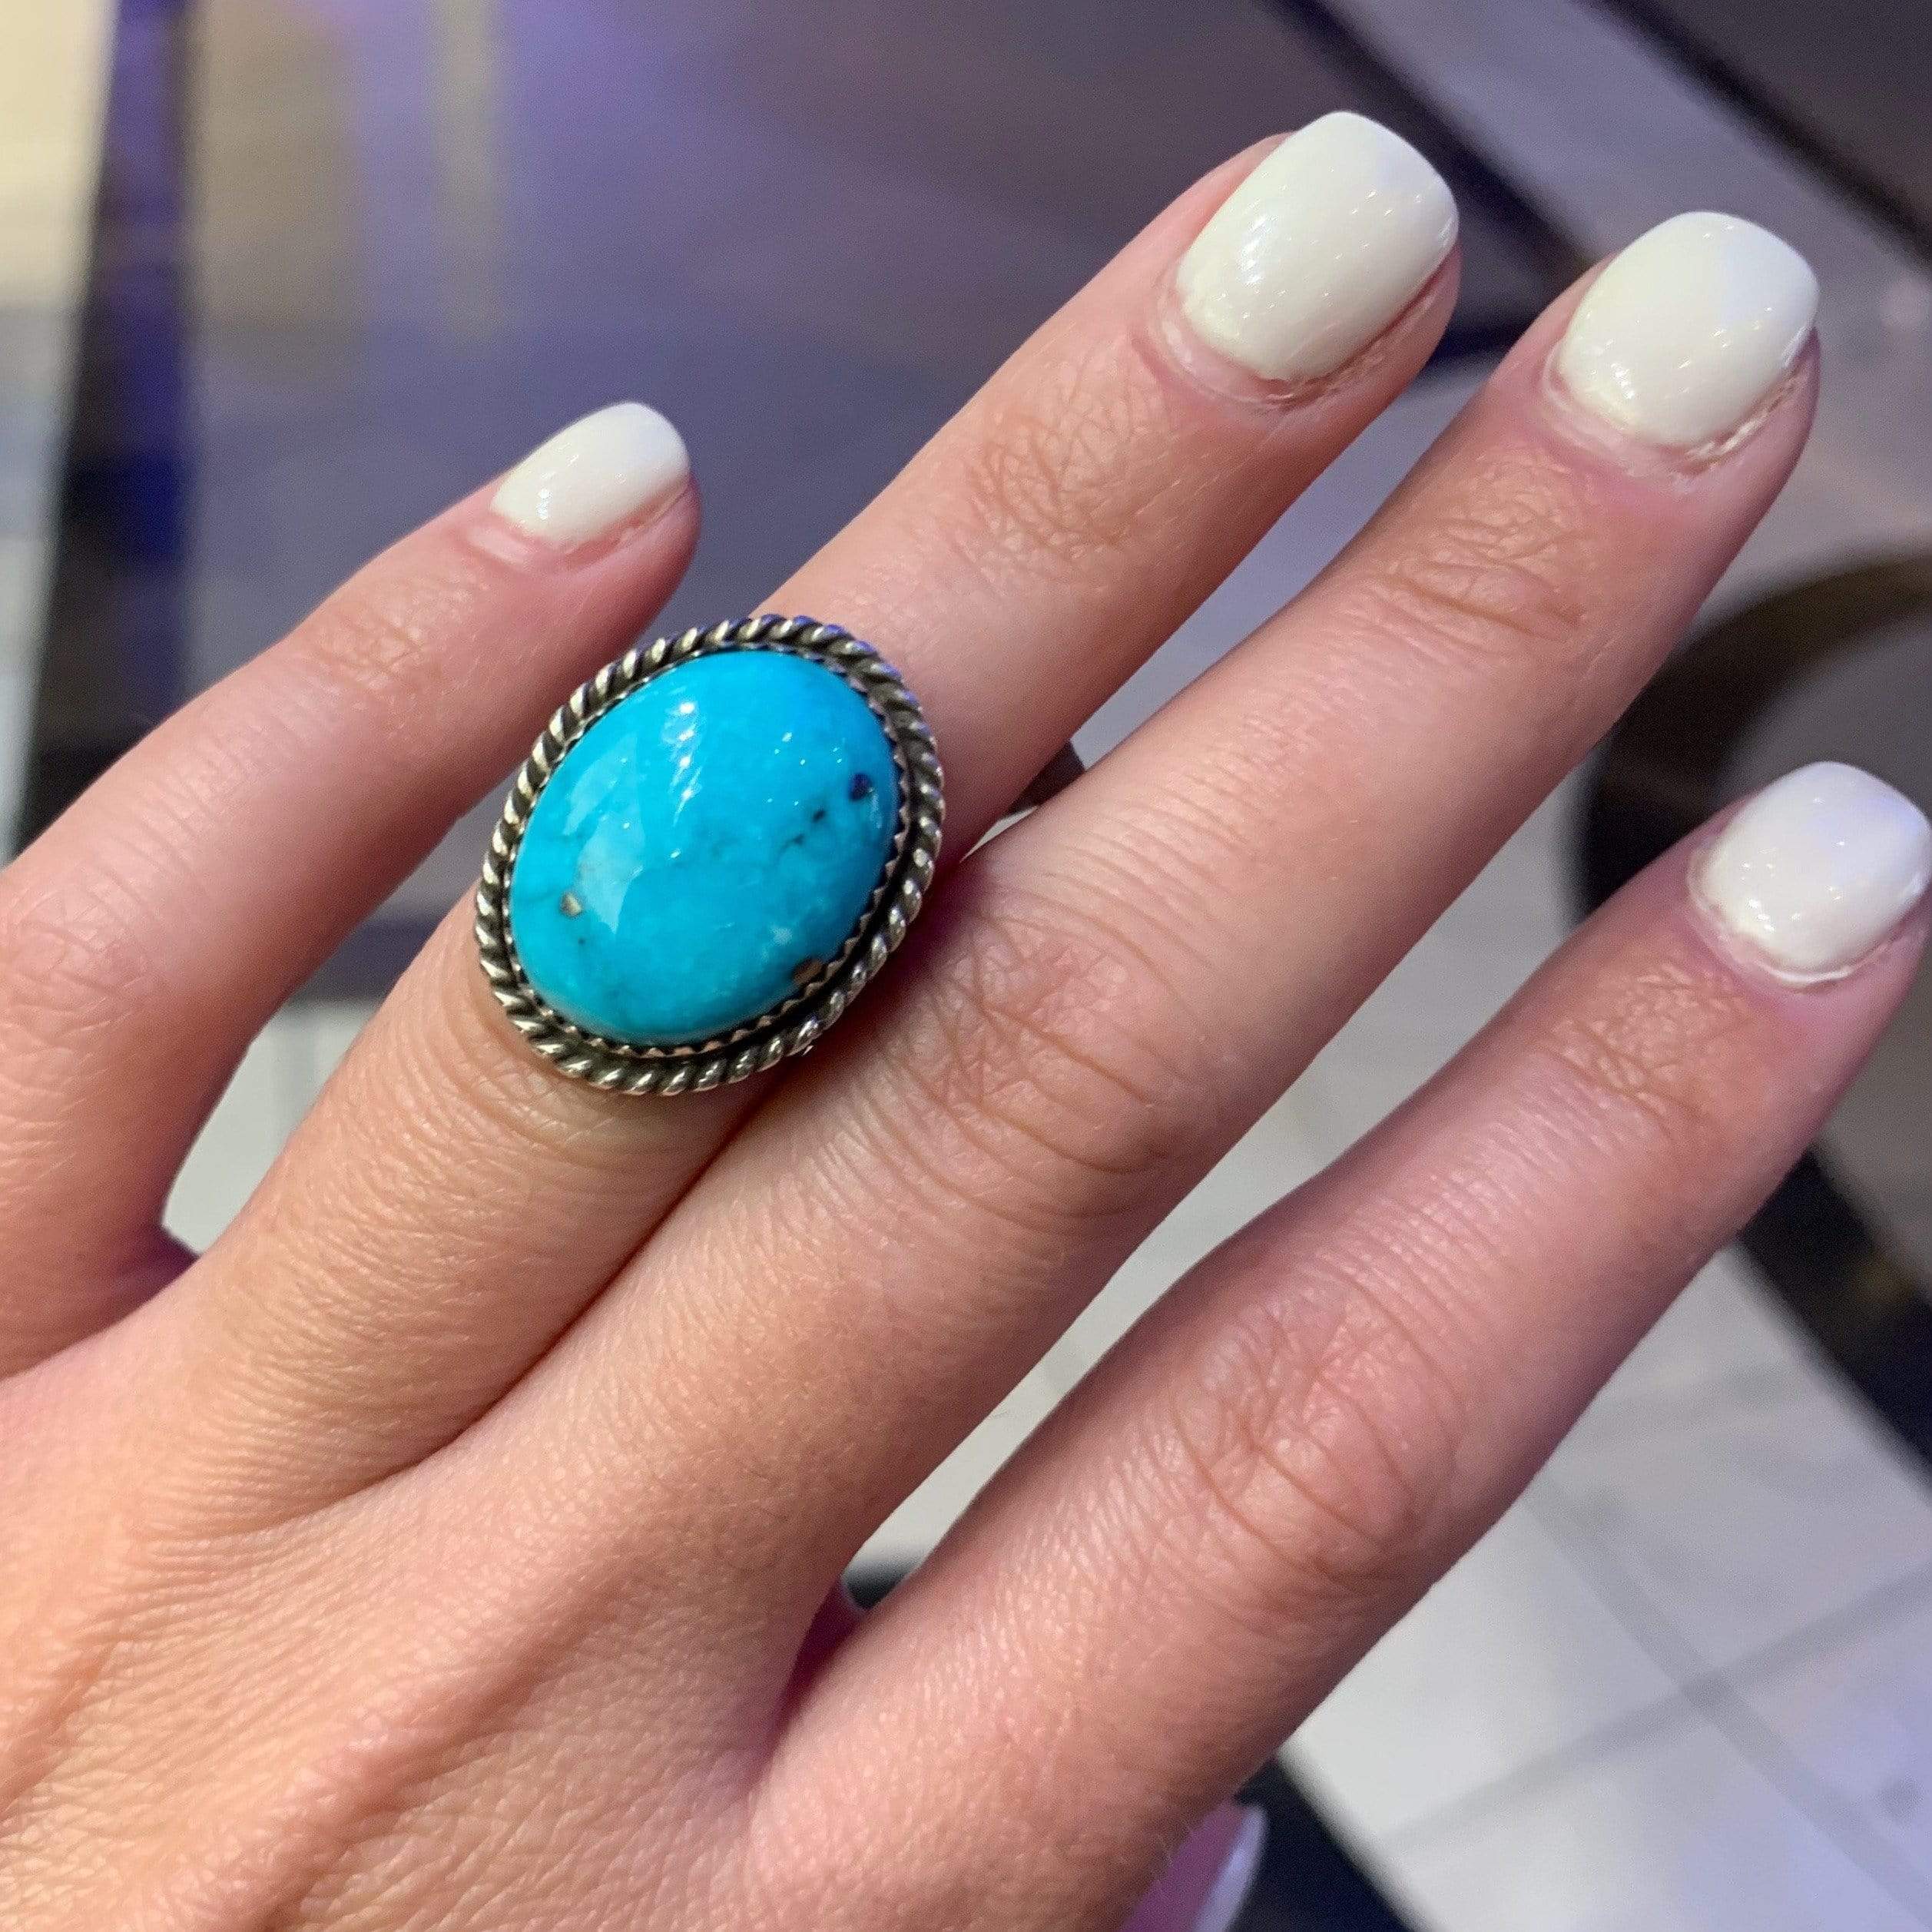 Kalifano Native American Jewelry 6 Kingman Turquoise Native American Made 925 Sterling Silver Ring NAR400.004.6